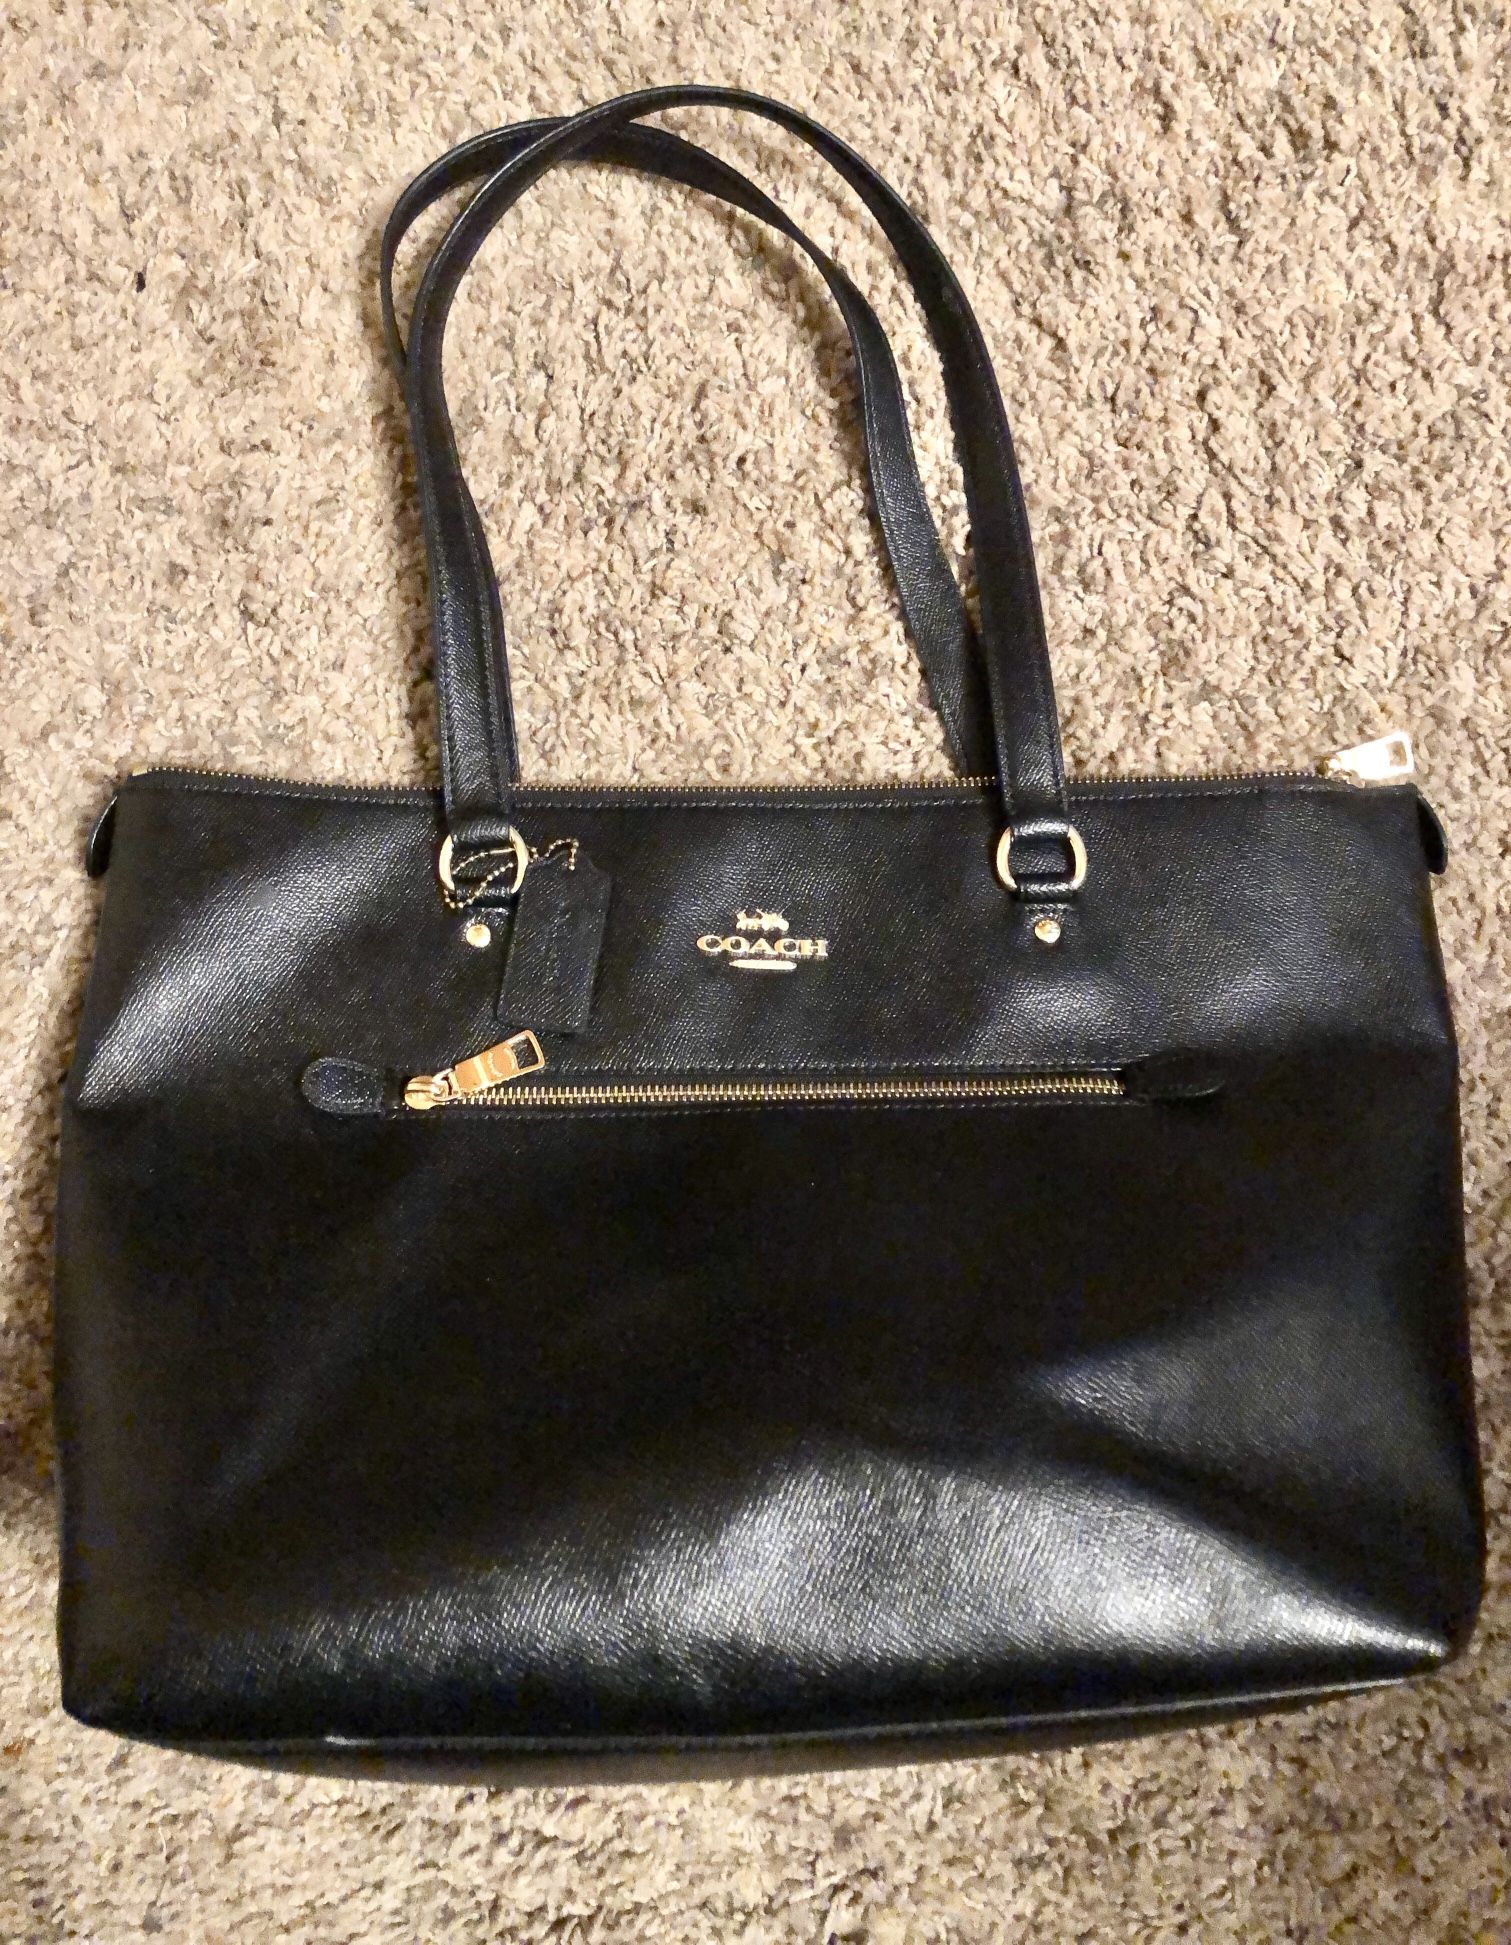 Coach Gallery Over Shoulder Large Tote - Black Leather